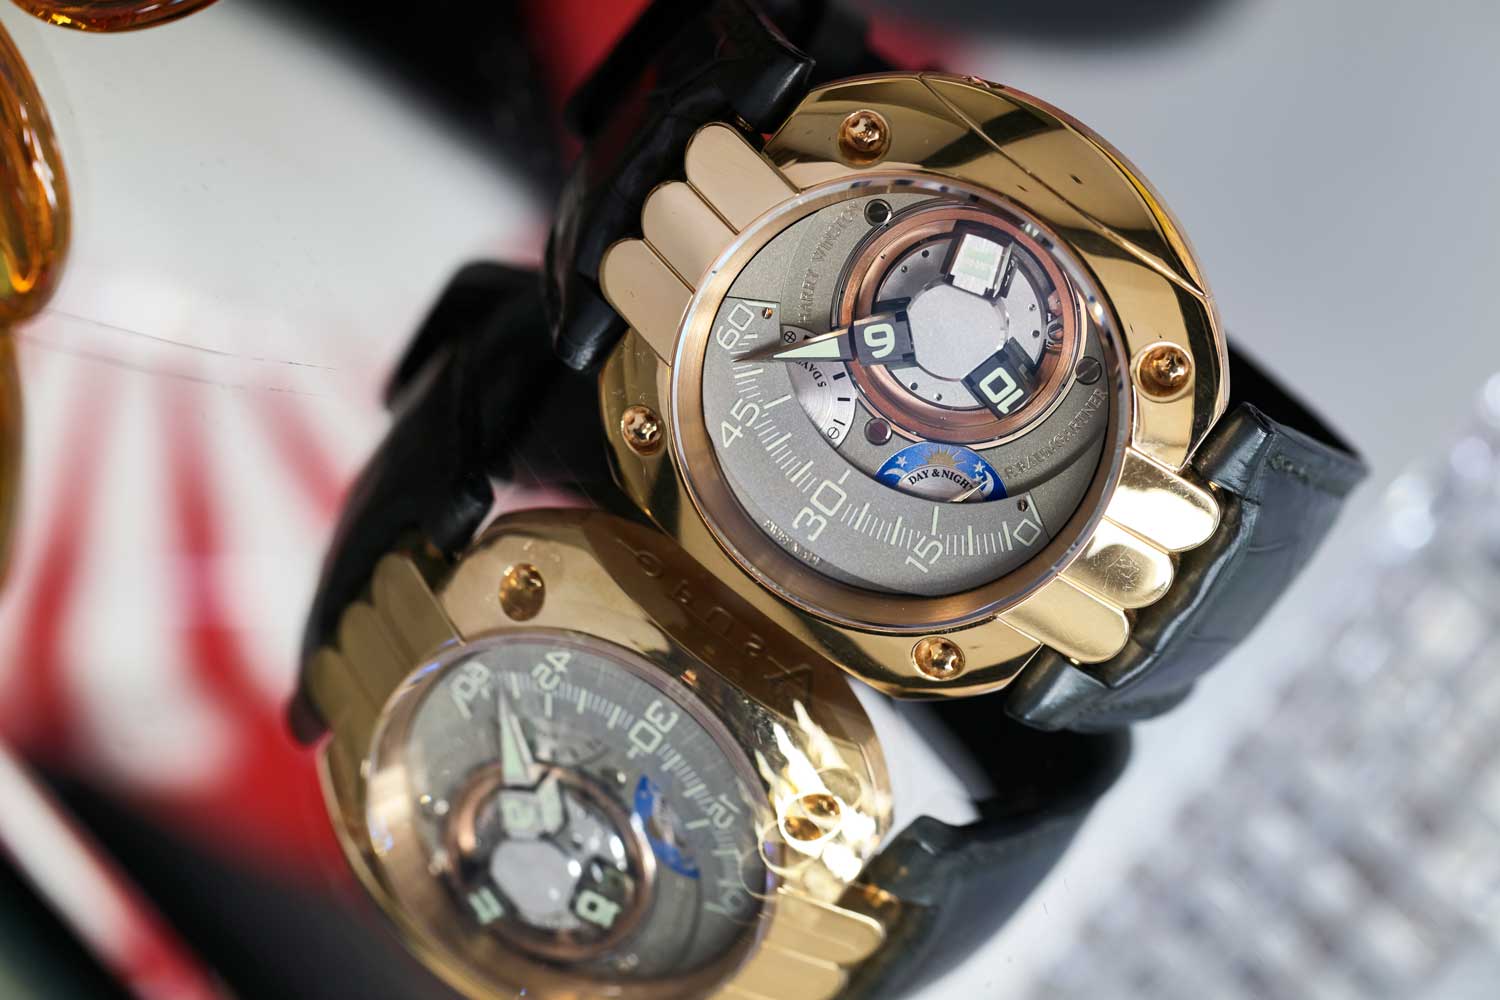 Two horological marvels from Santa Laura’s collection: the Harry Winston Opus 5 created by Felix Baumgartner and the Opus 3 created by Vianney Halter (©Revolution)